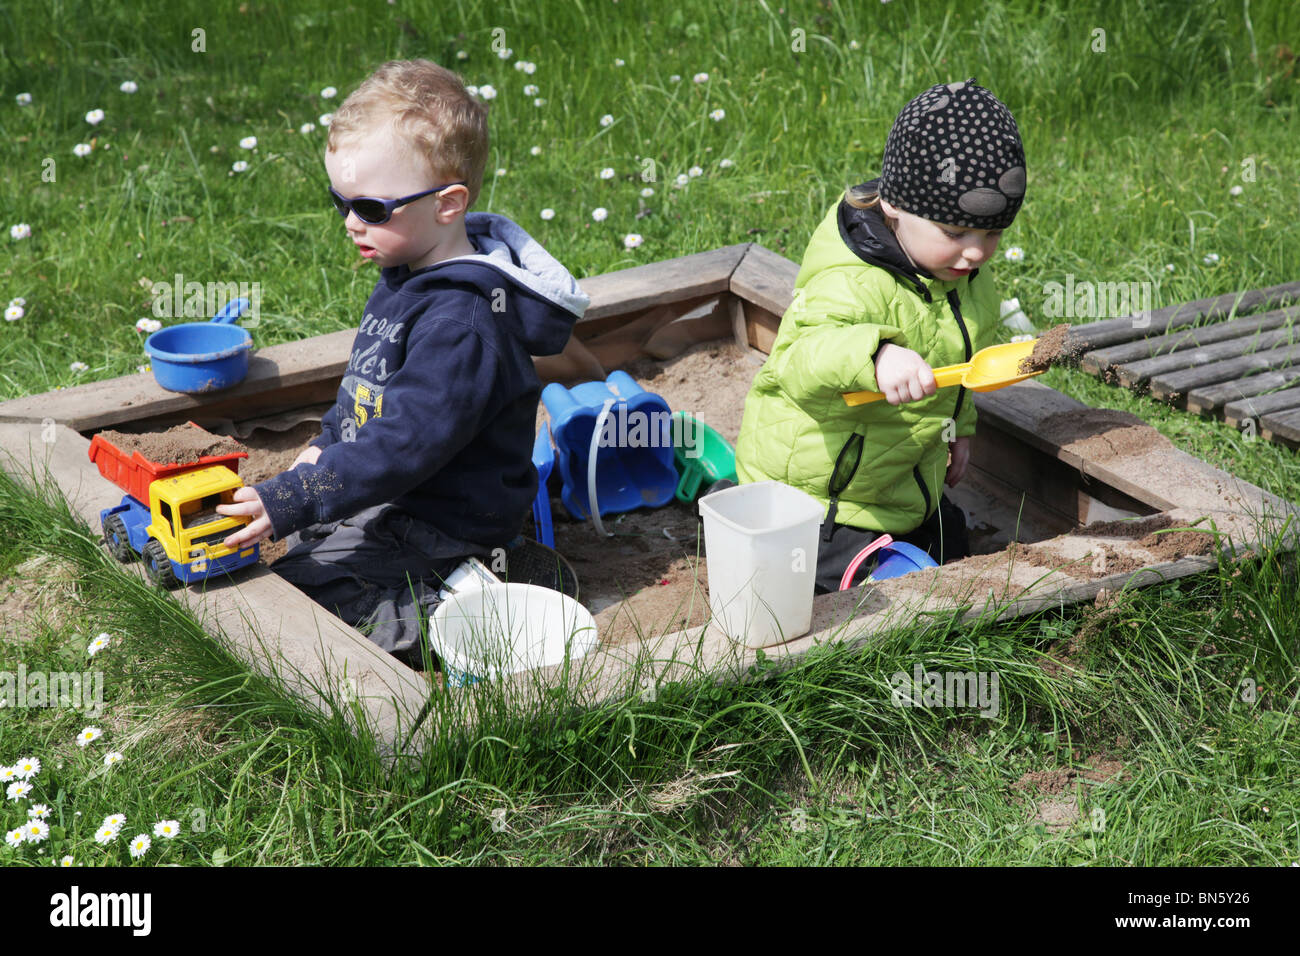 Toddlers siblings boy girl brother sister in the garden playing in a sandpit with plastic toys MODEL RELEASED Stock Photo